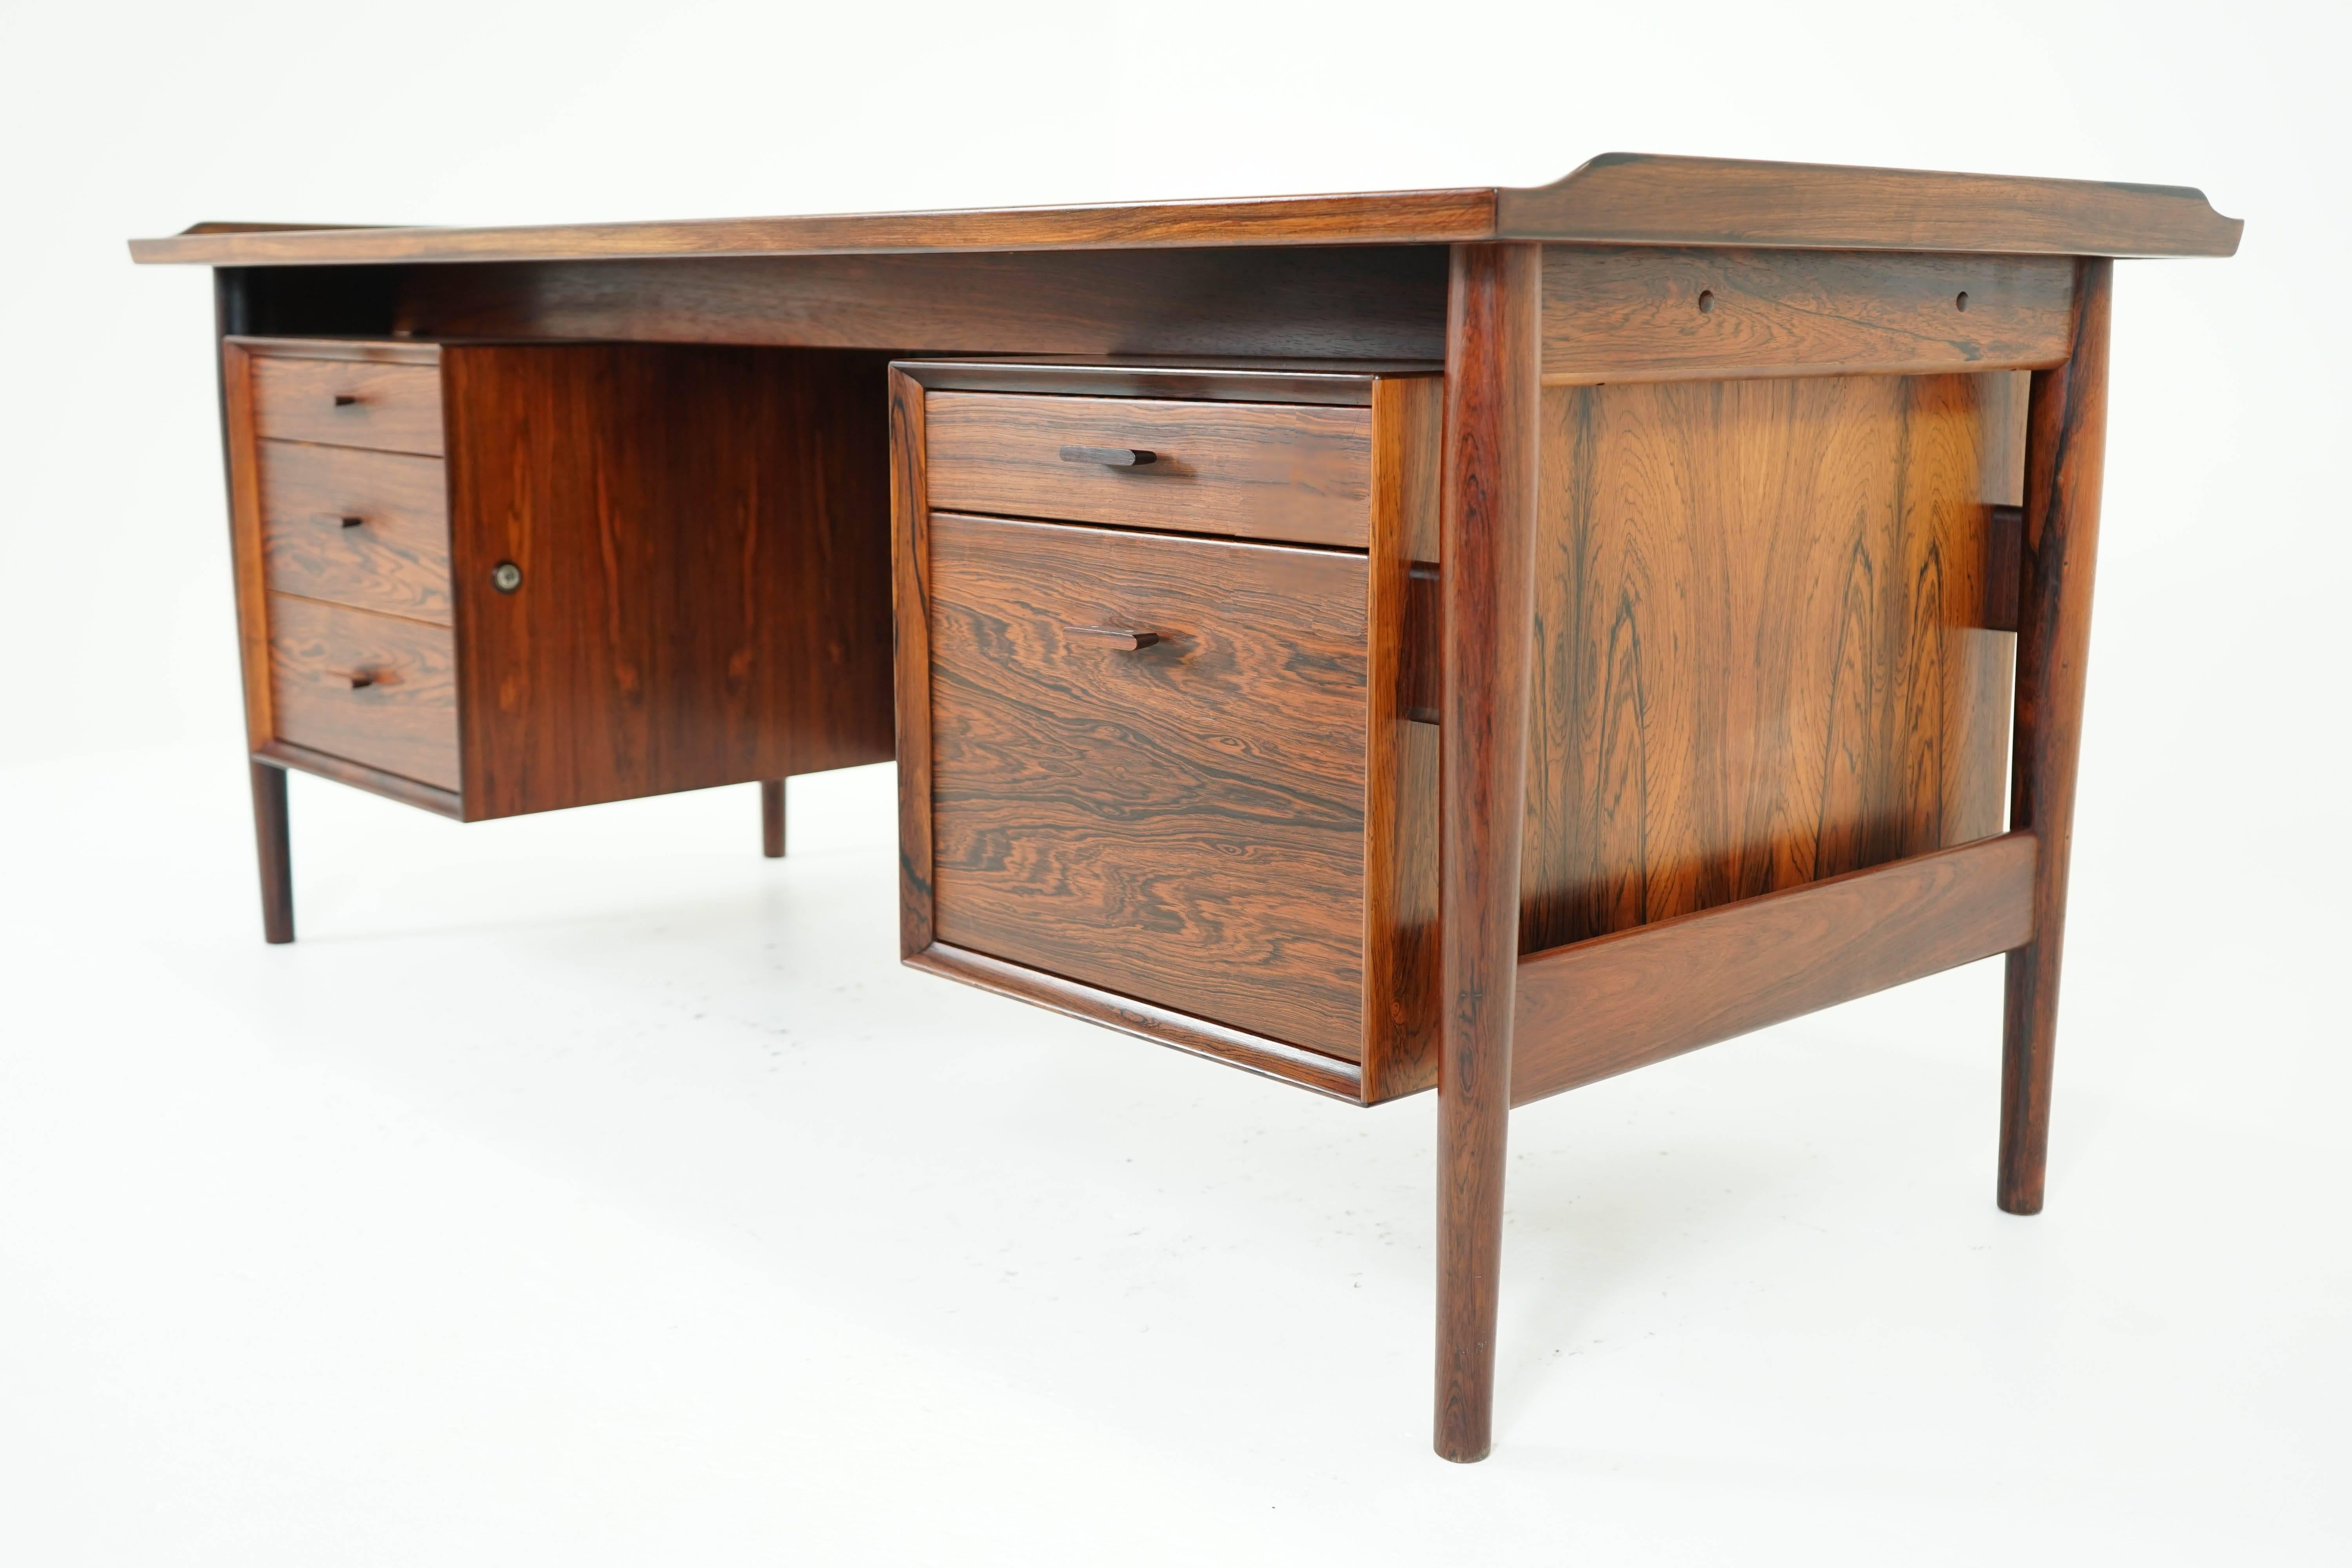 A Mid-Century desk, model 207, designed by Arne Vodder and made by Sibast Furniture. Solid wood and veneer construction with dovetail joinery, unique handles and original finish. Keys included, desk labeled "Sibast Furniture".